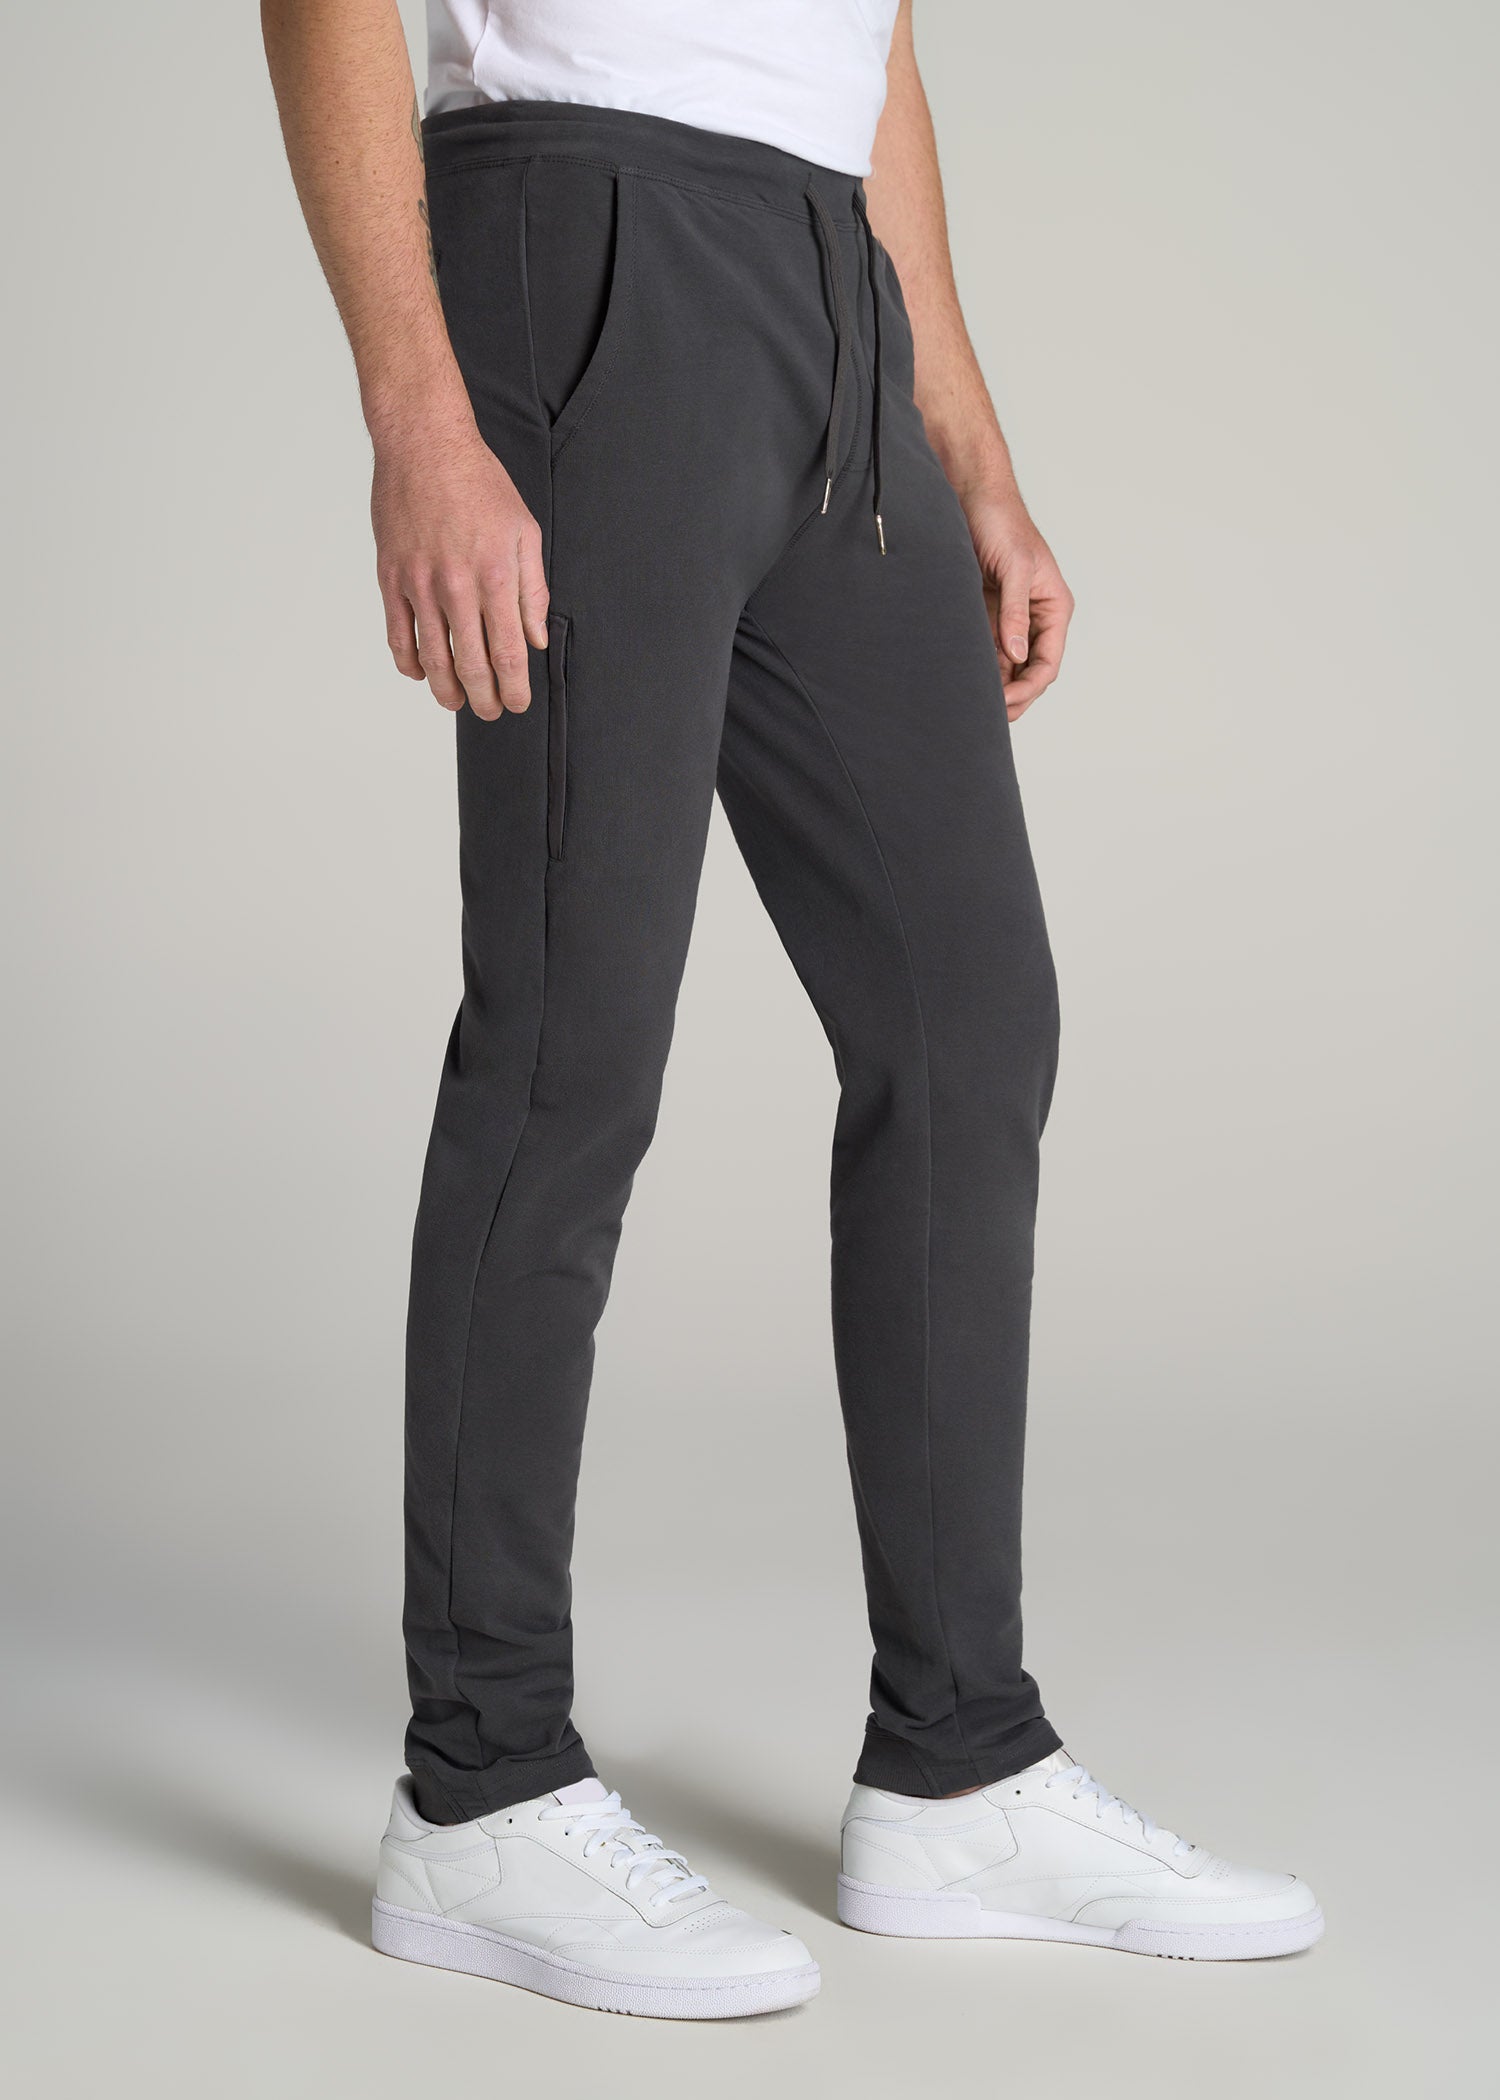 Microsanded French Terry Sweatpants for Tall Men in Marine Navy